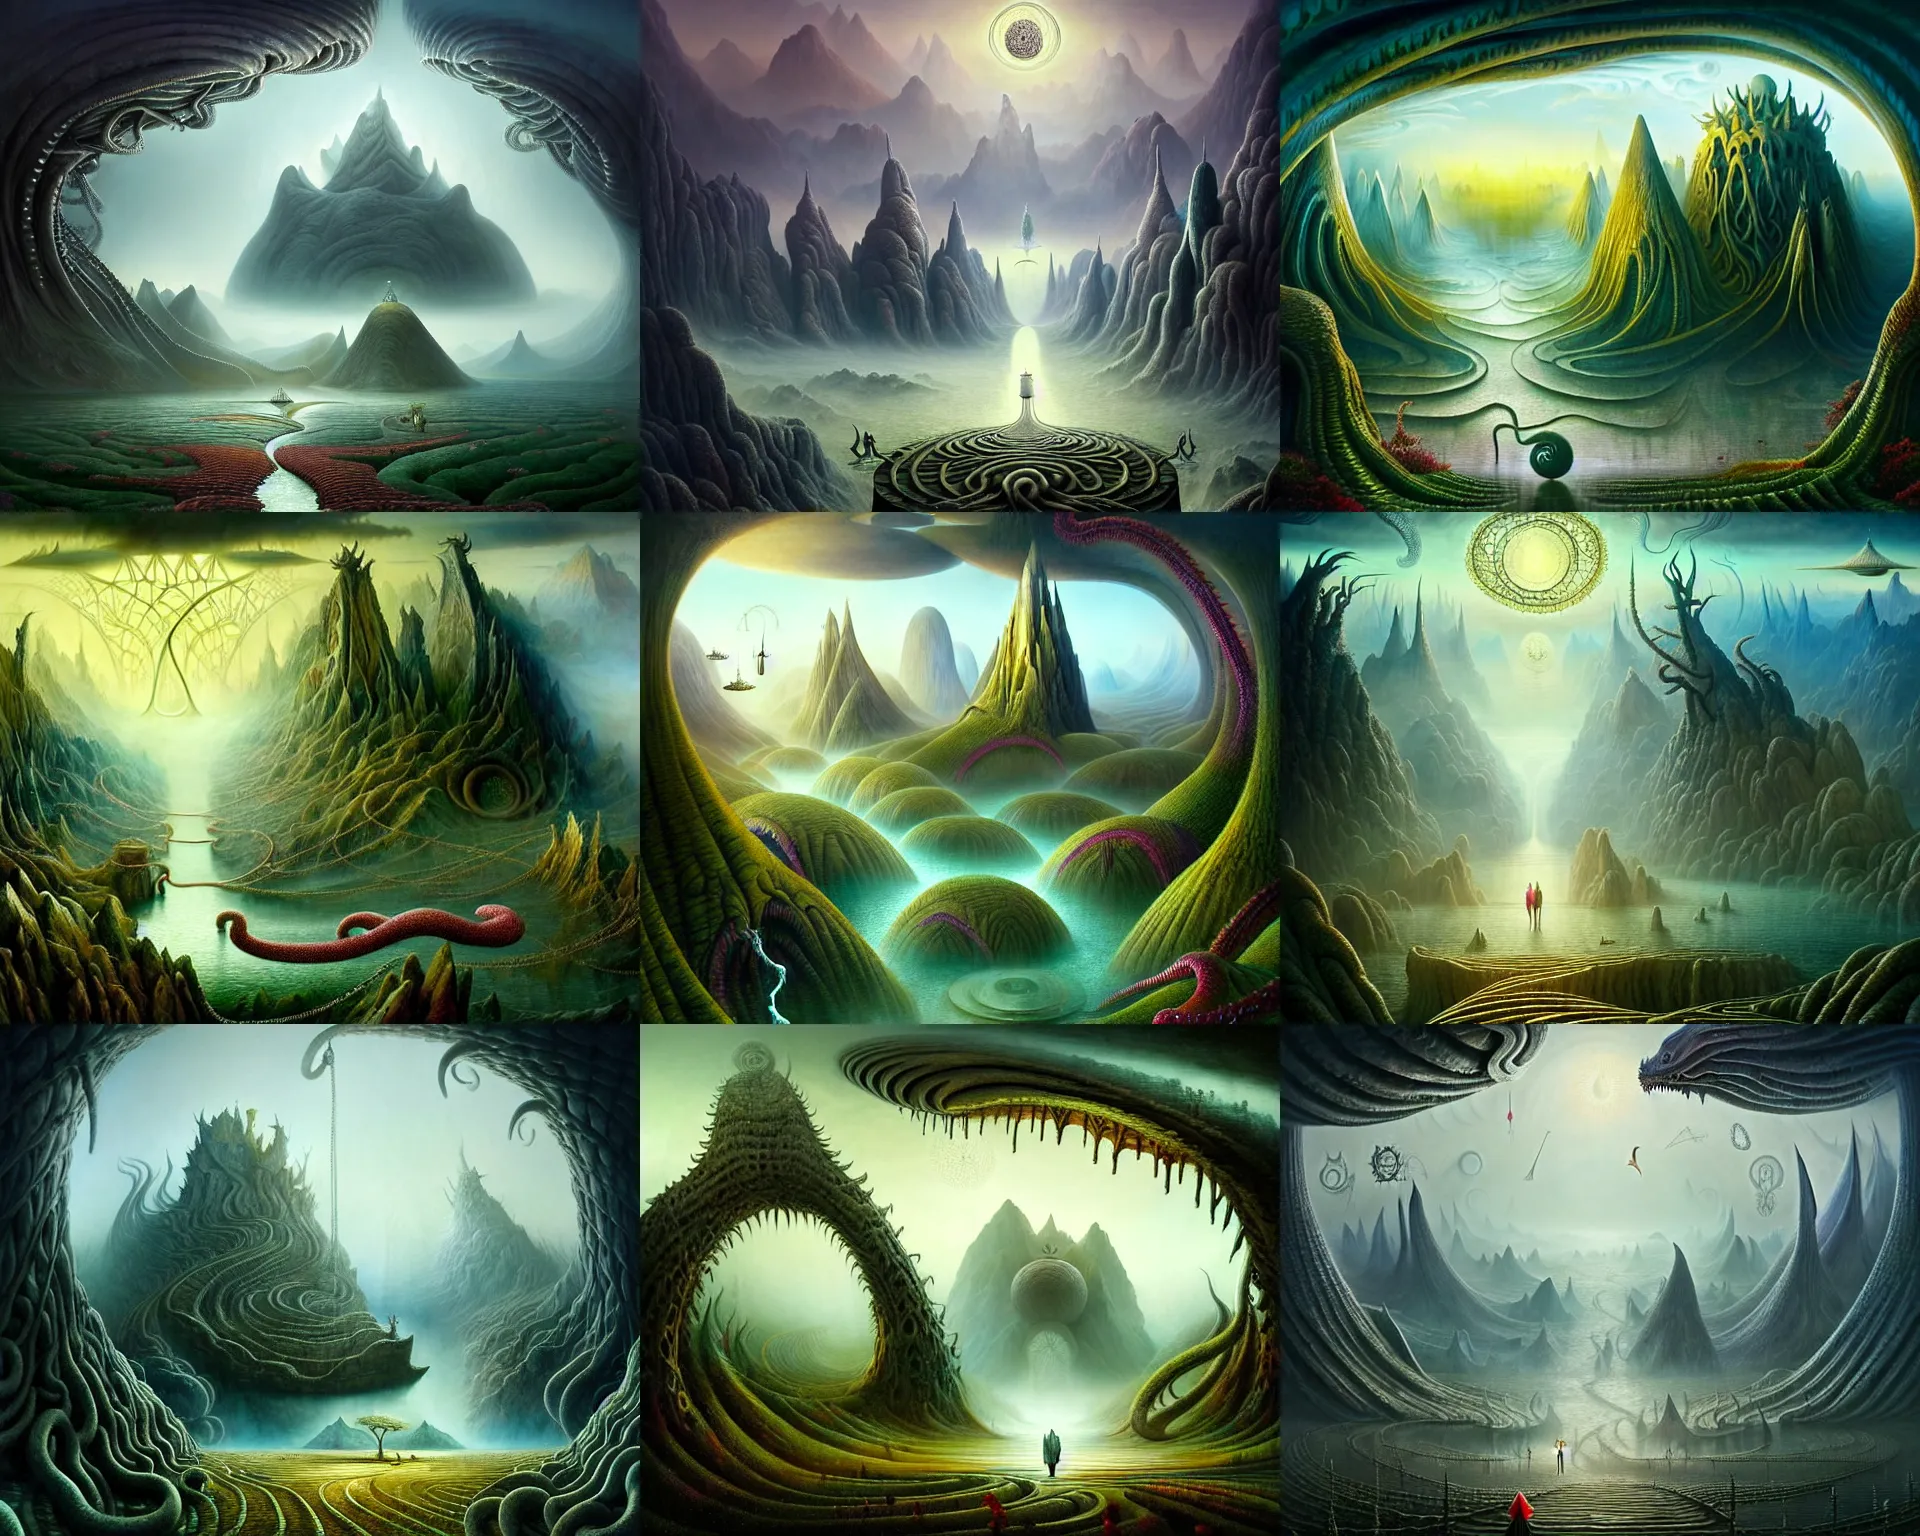 Prompt: a beguiling epic stunning beautiful and insanely detailed matte painting of the impossible winding path through the land of the elder gods with surreal architecture designed by Heironymous Bosch, mega structures inspired by Heironymous Bosch's Garden of Earthly Delights, vast surreal landscape and horizon by Asher Durand and Cyril Rolando and Andree Wallin, masterpiece!!!, grand!, imaginative!!!, whimsical!!, epic scale, intricate details, sense of awe, elite, wonder, insanely complex, masterful composition!!!, sharp focus, fantasy realism, dramatic lighting